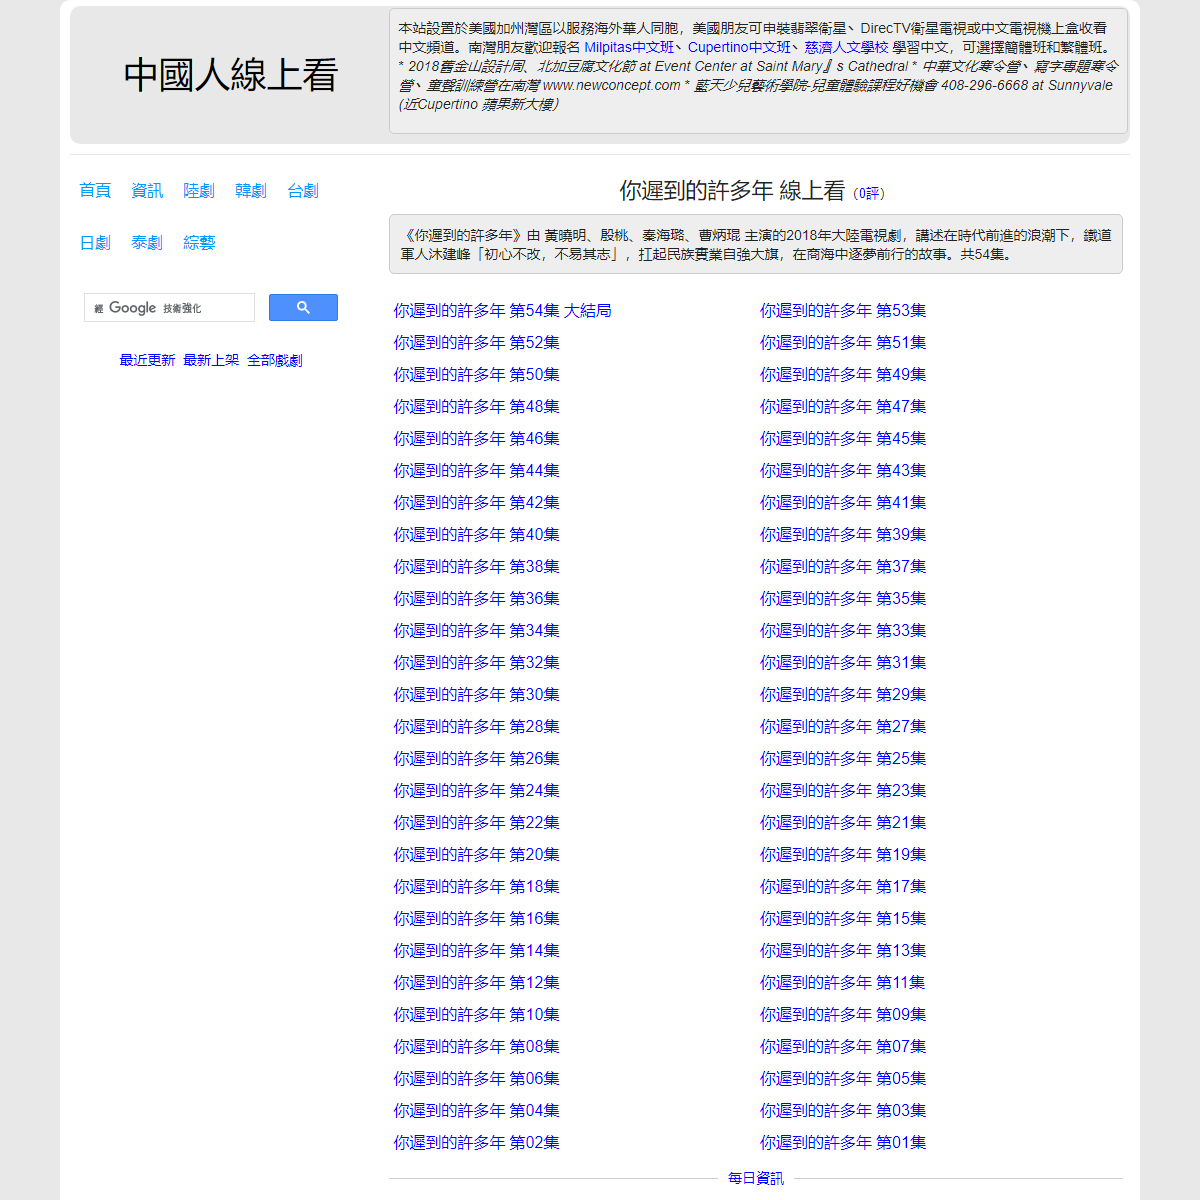 A complete backup of https://chinaq.tv/cn180928/